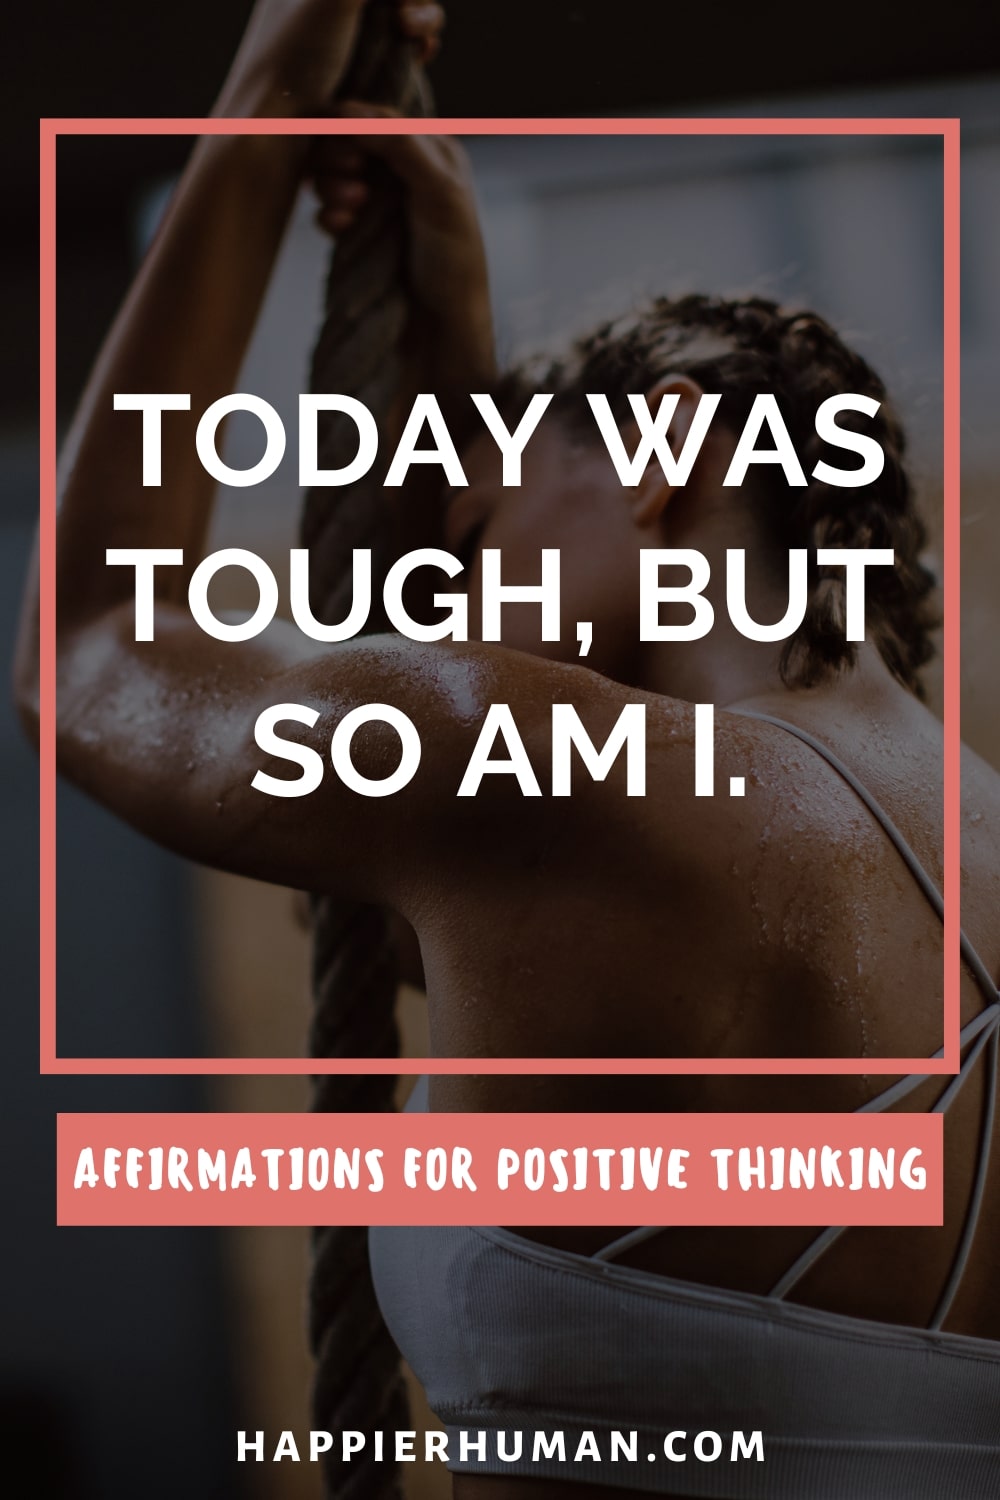 affirmations for positive thinking | positive thinking happy affirmation | affirmations for positive thinking morning